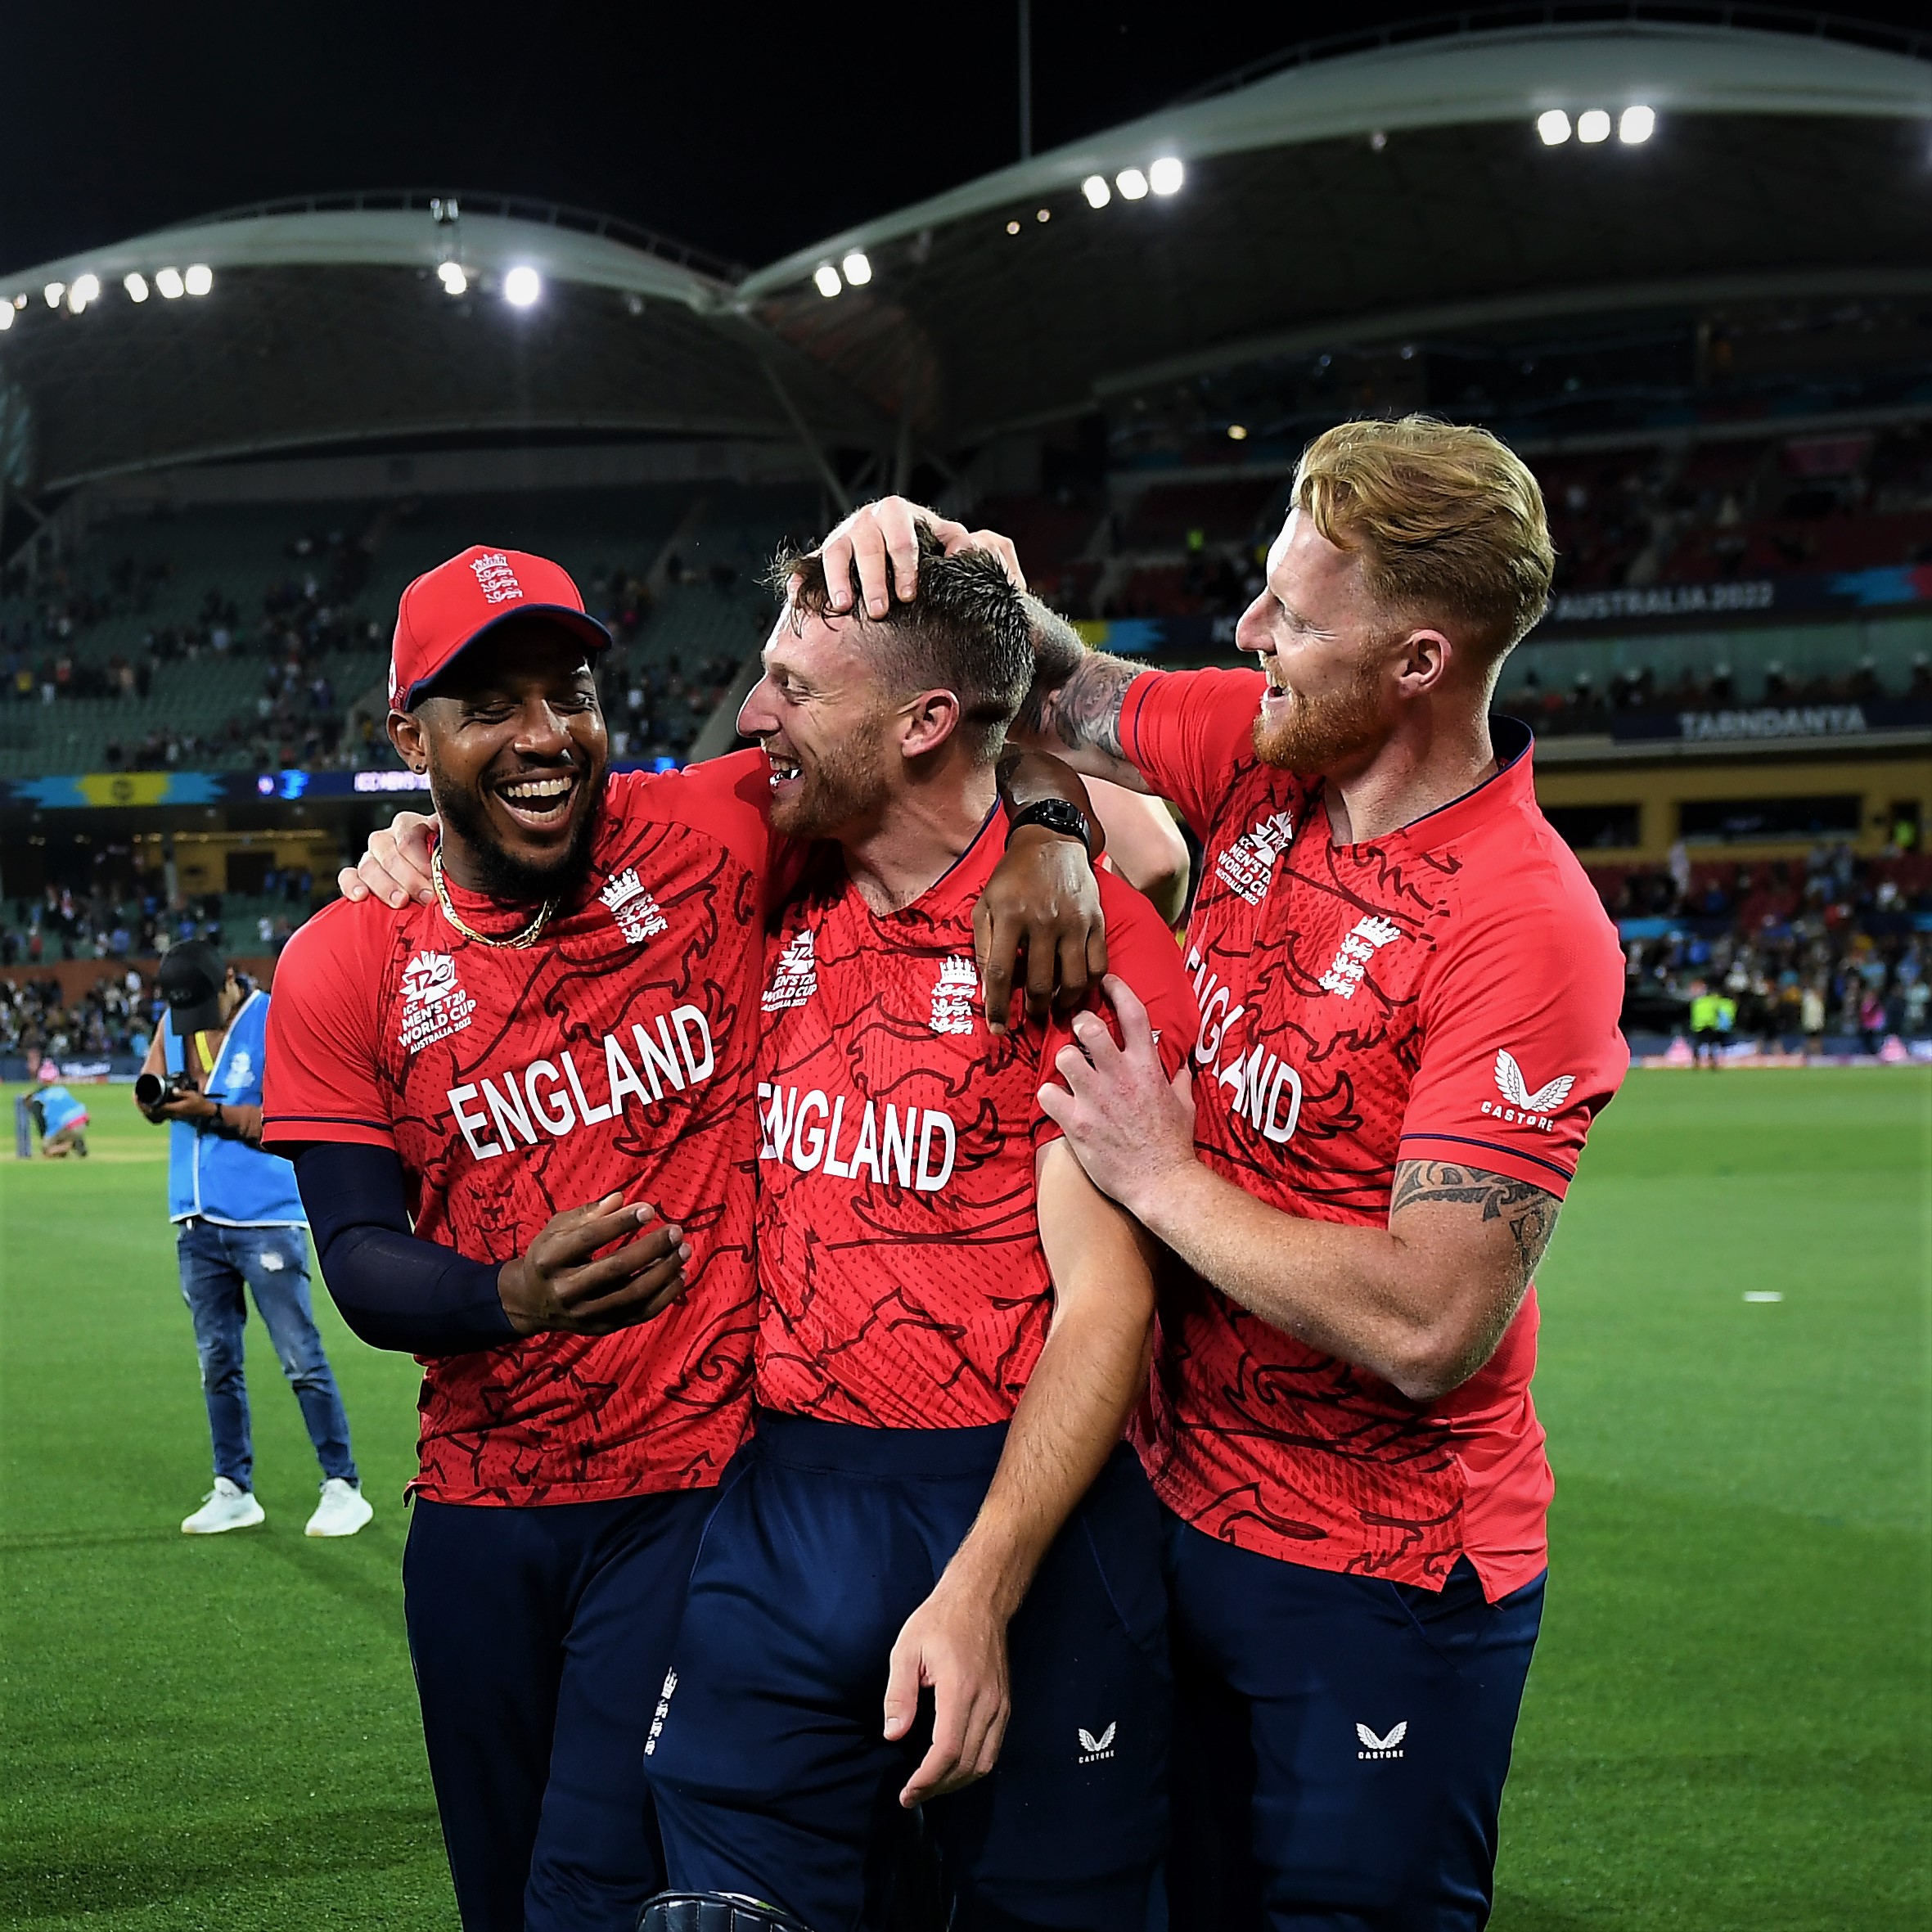 PAK vs ENG LIVE: Team England set to depart for Melbourne to face Pakistan in ICC T20 World Cup 2022 FINAL at MCG - Follow Pakistan vs England LIVE, T20 WC 2022